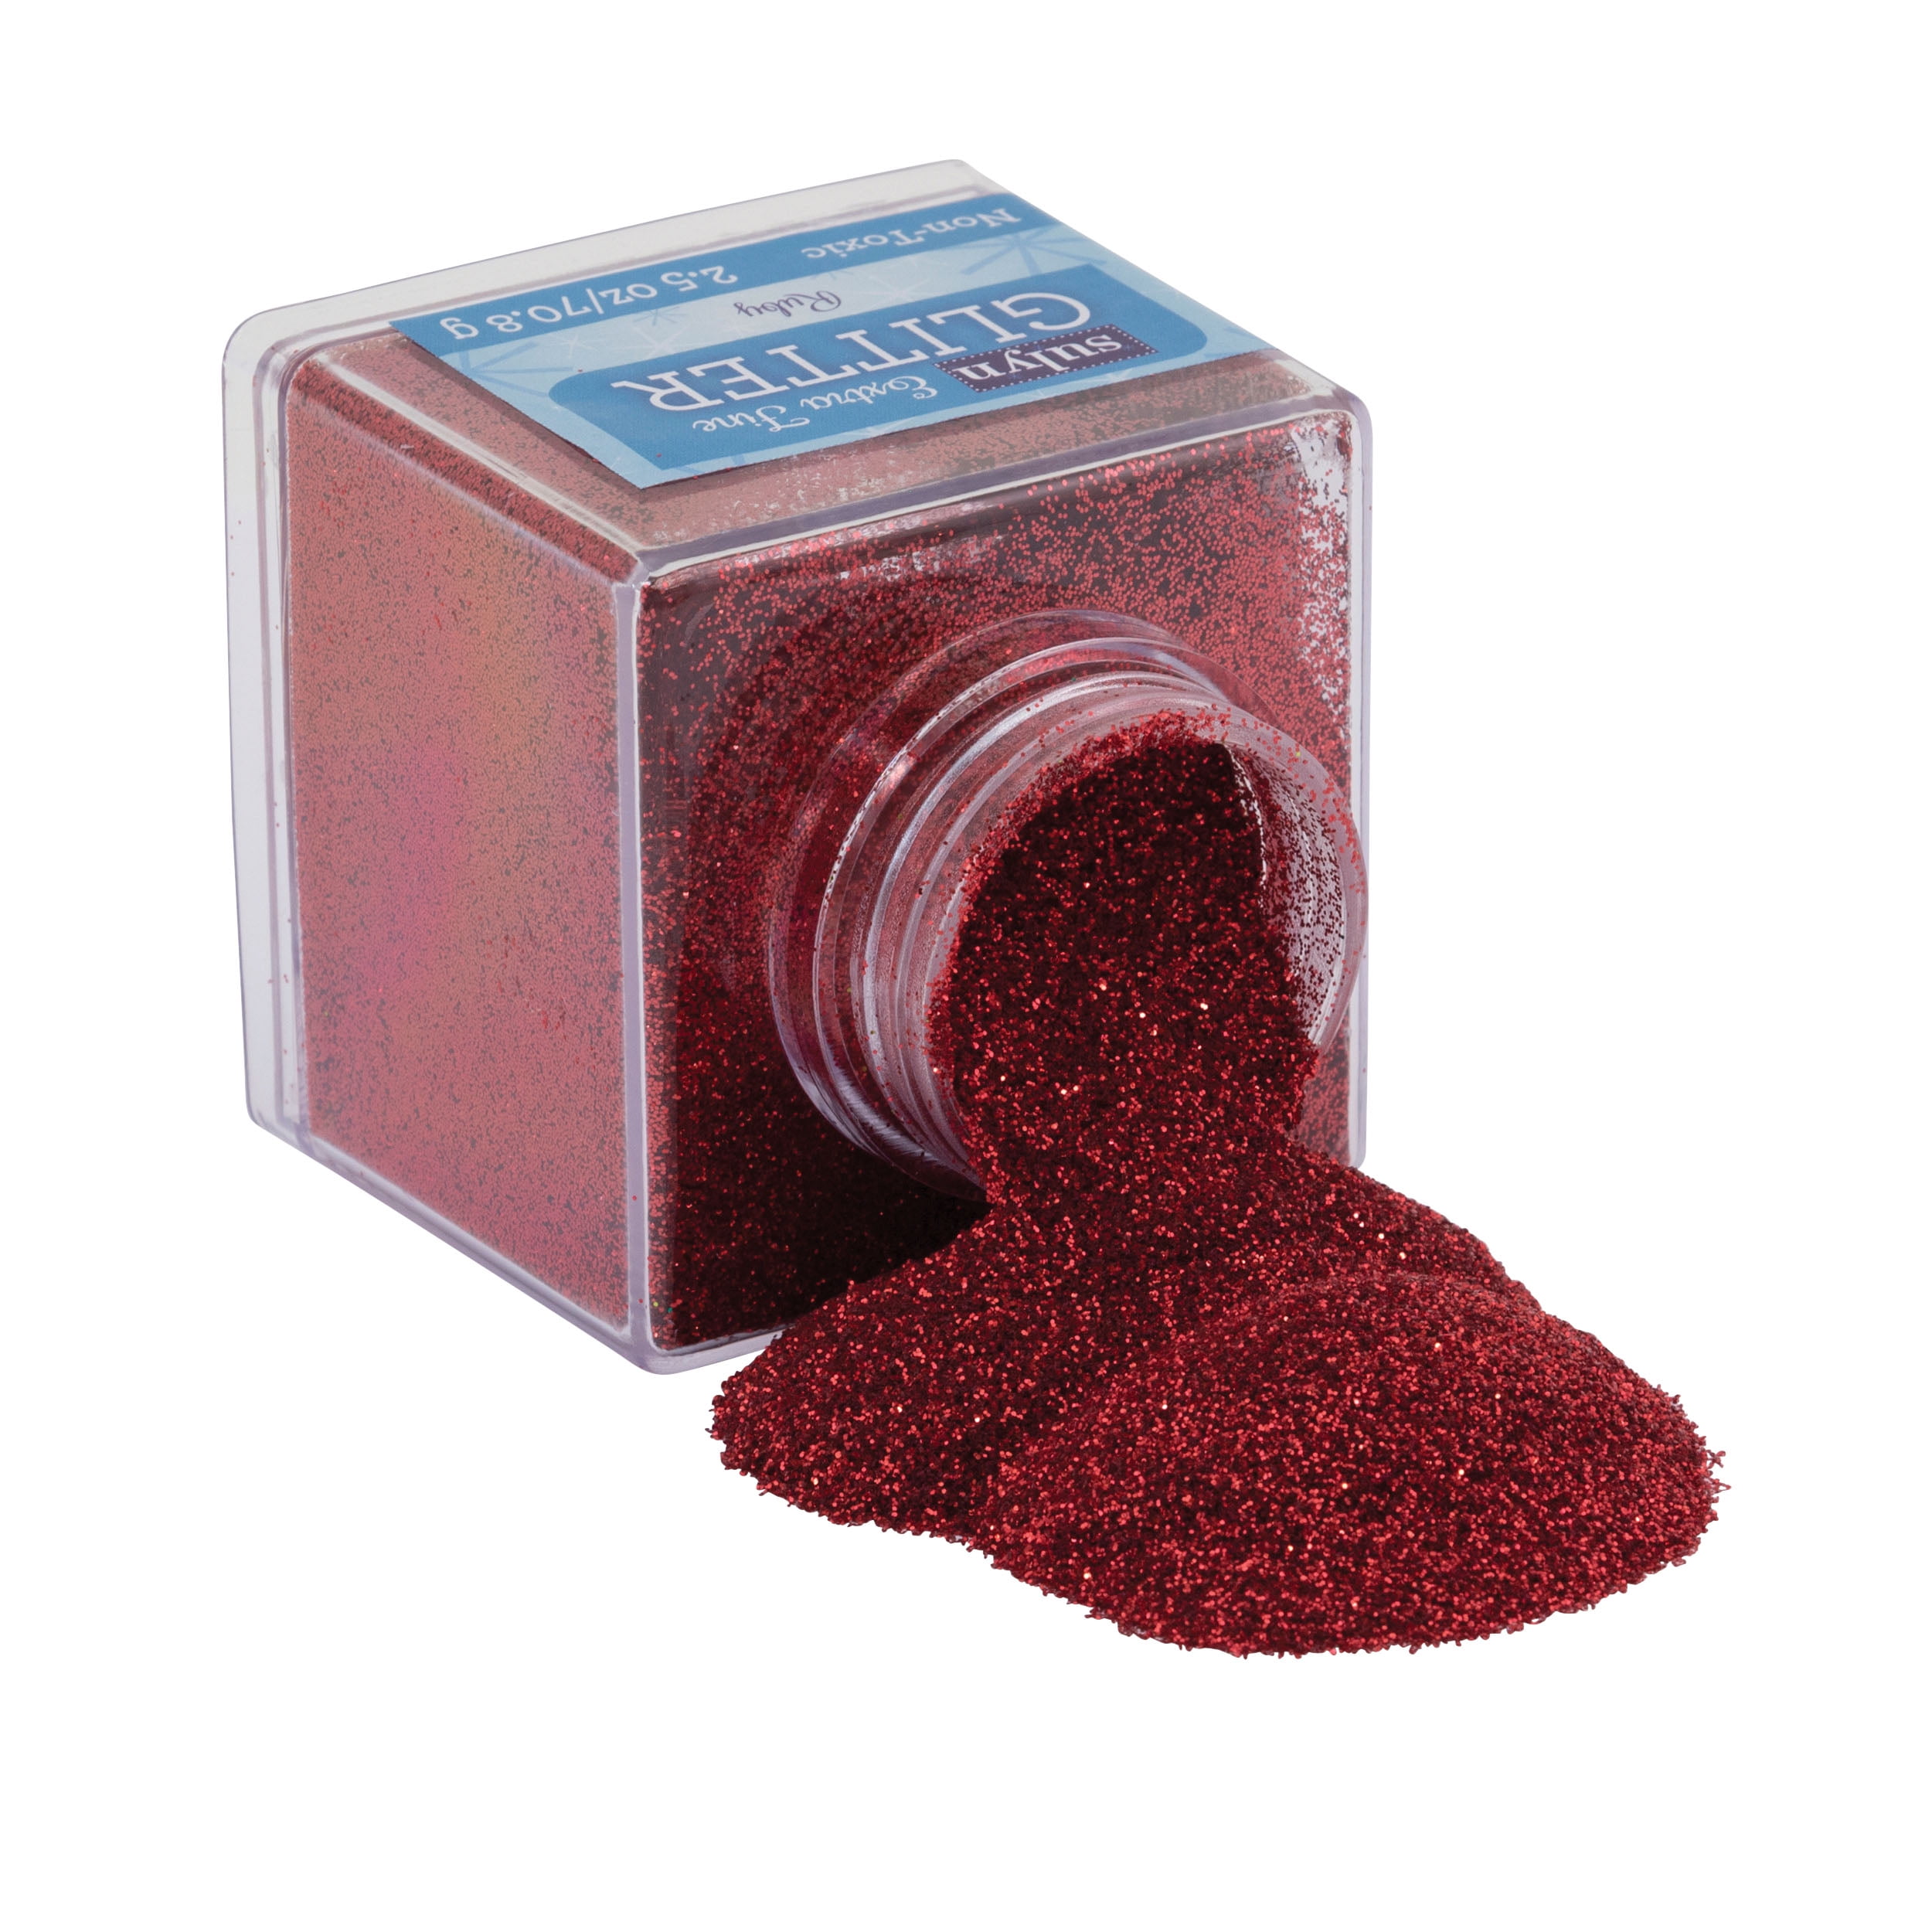 Extra fine glitter 2 oz/56 g Ruby color non-toxic. Shaker bottle or pour